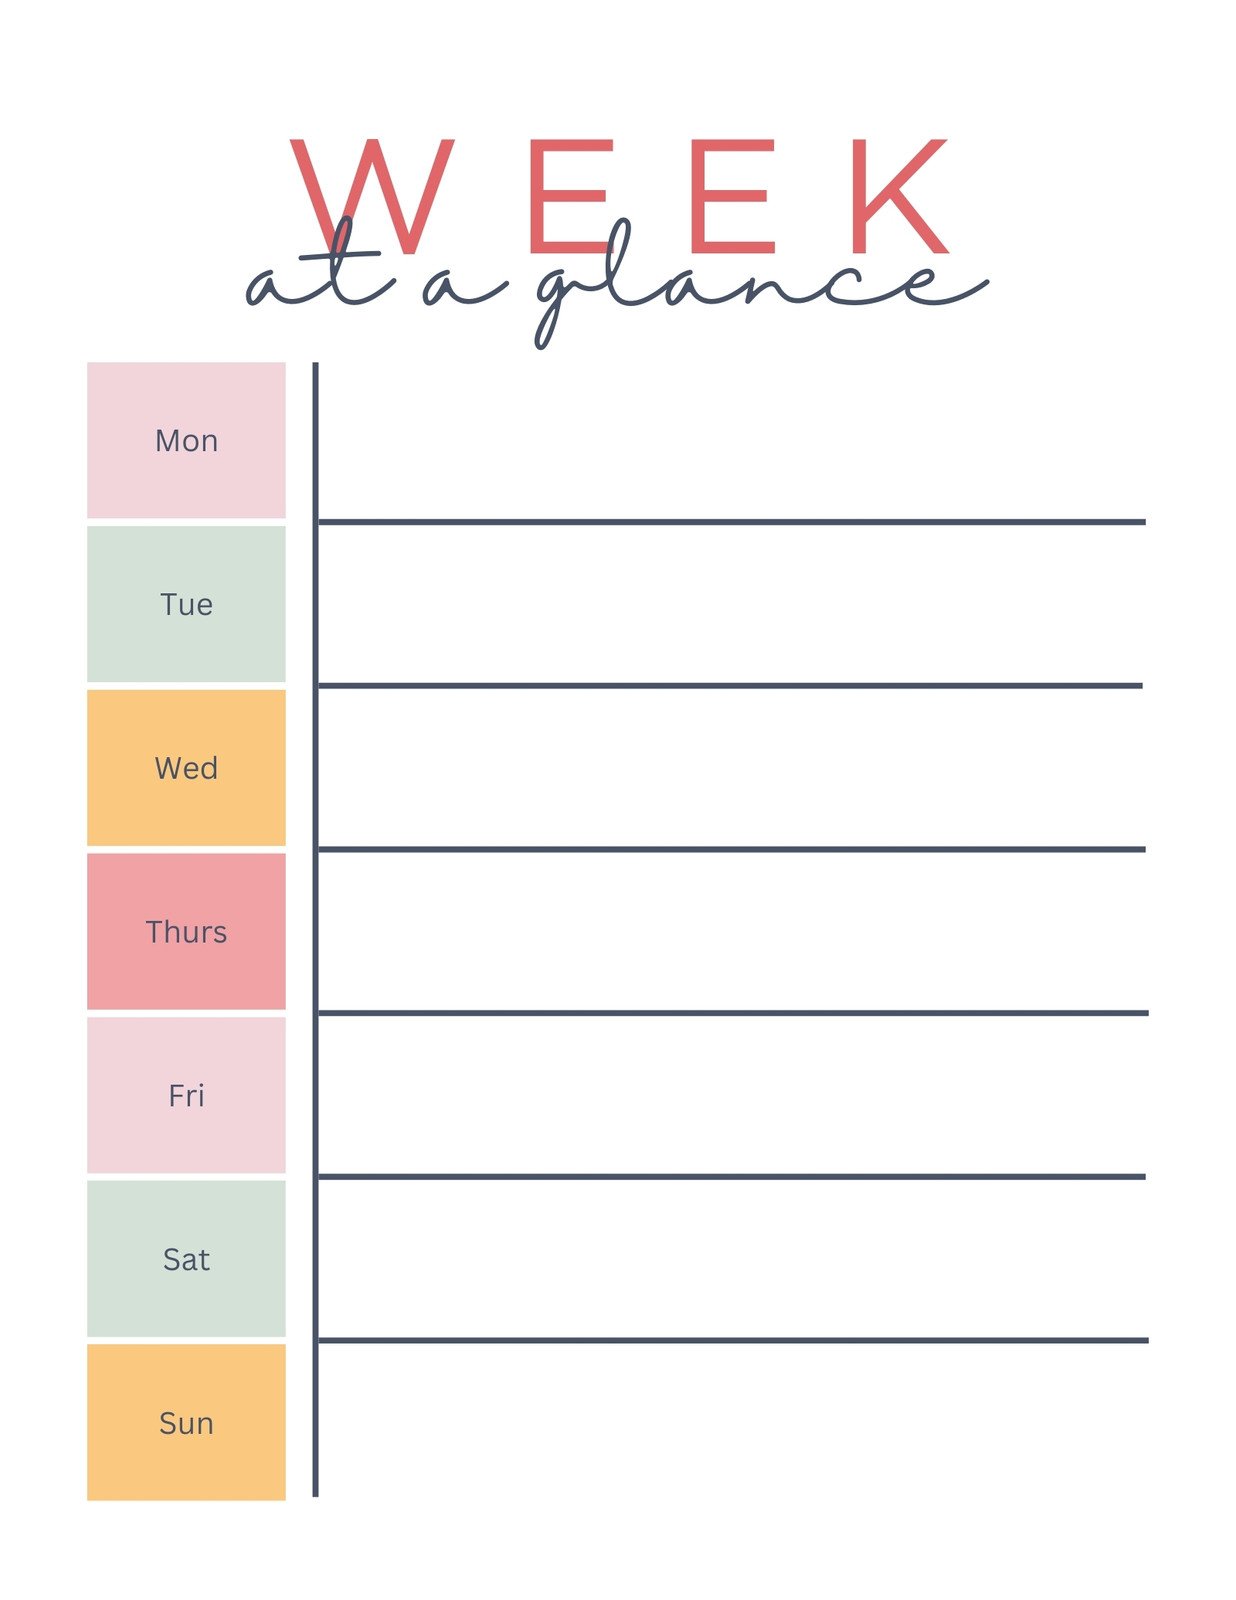 Free And Customizable Weekly Planner Templates | Canva